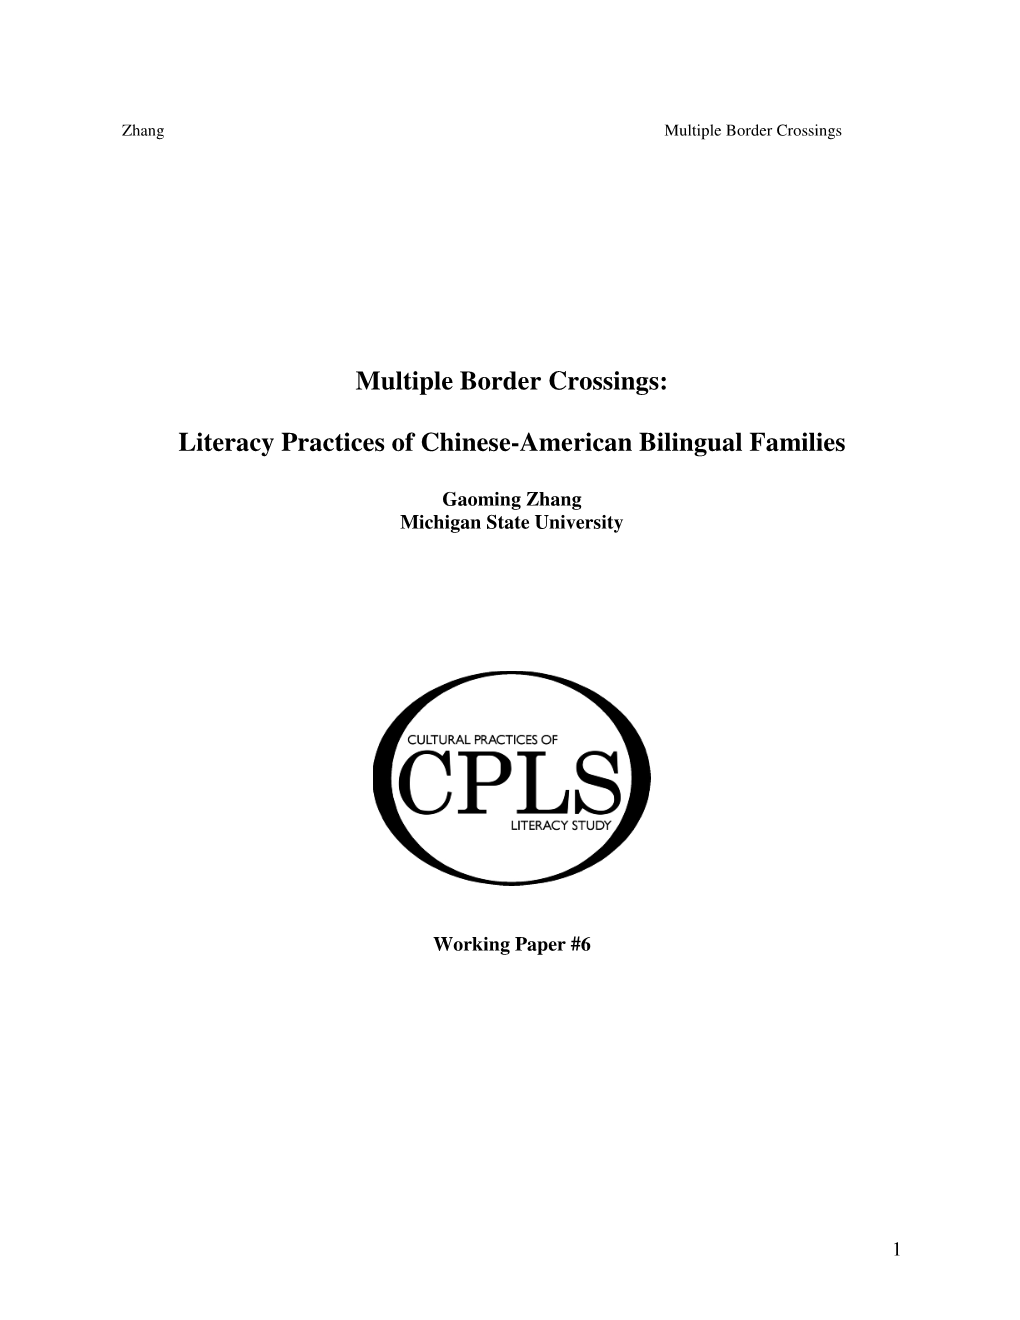 Literacy Practices of Chinese-American Bilingual Families